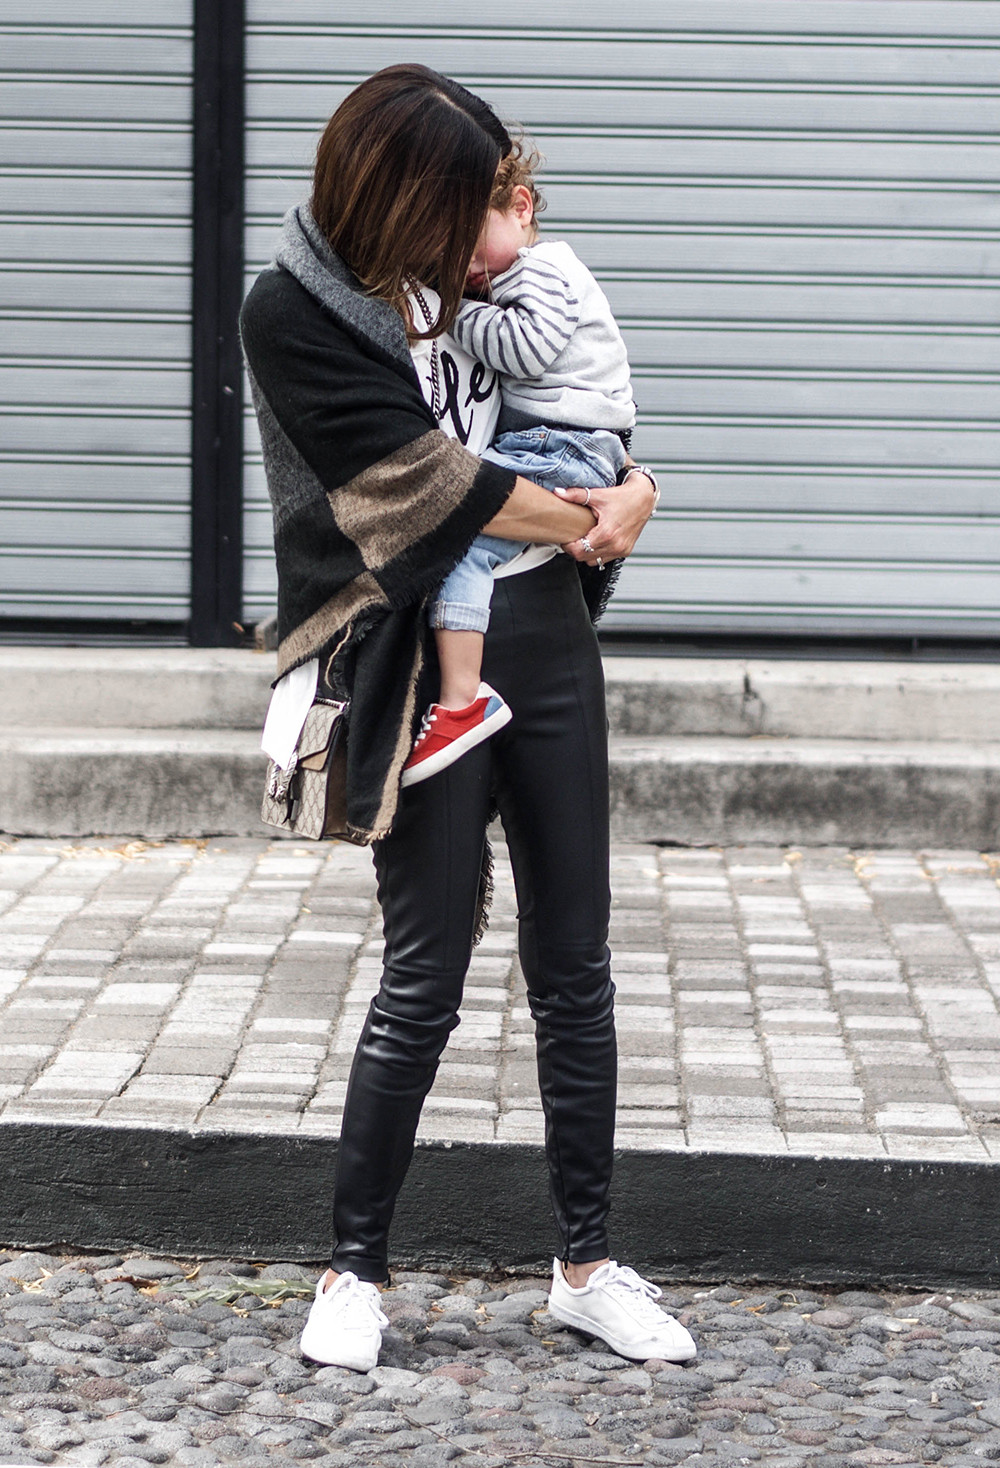 Baby Fashion Blogs
 A FAMILY TRADITION – Our Favorite Style